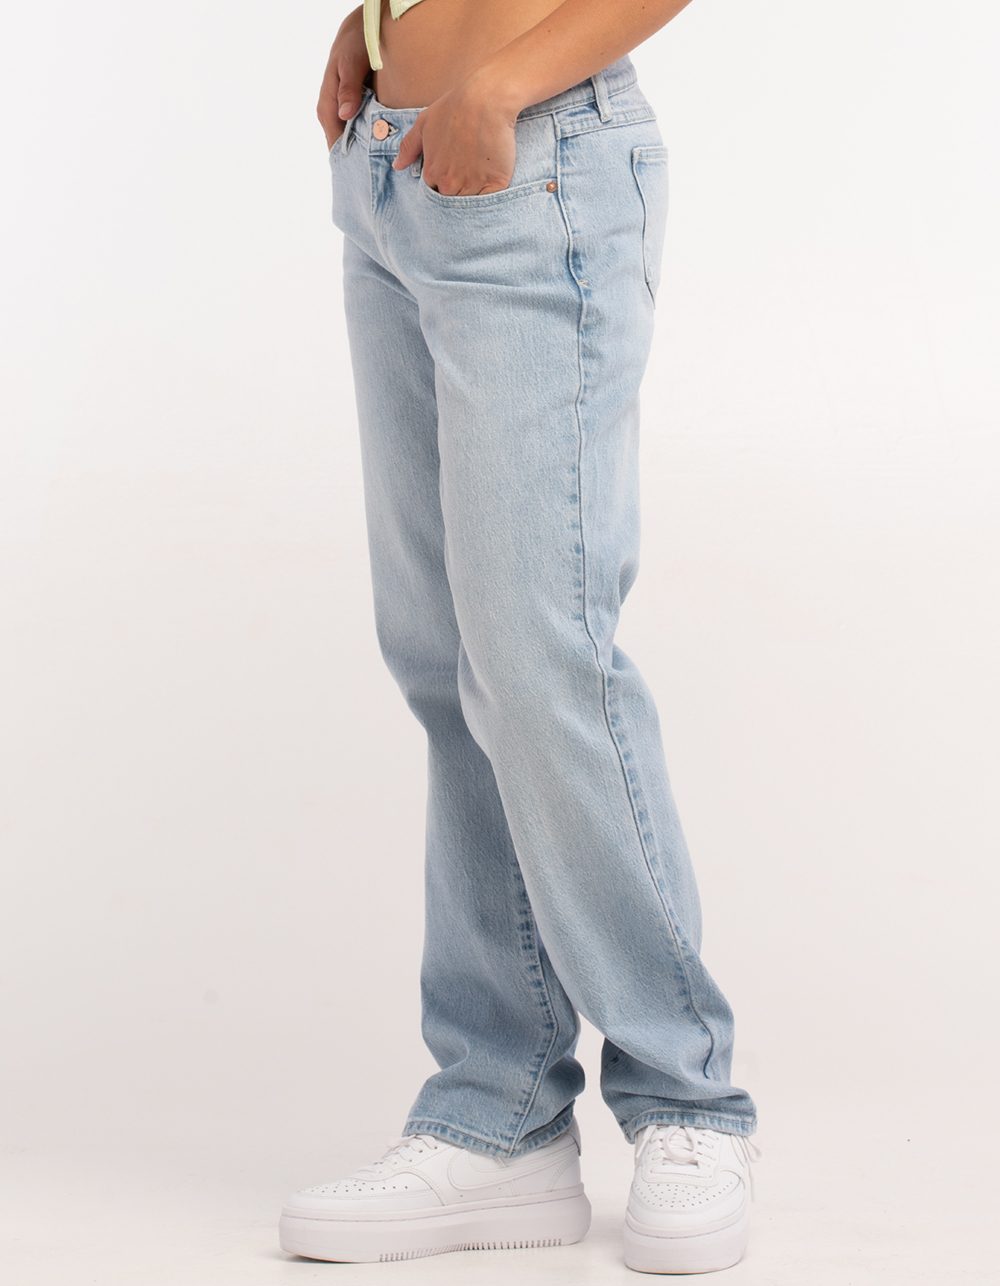 ABRAND A 99 Low Womens Straight Jeans - LIGHT WASH | Tillys